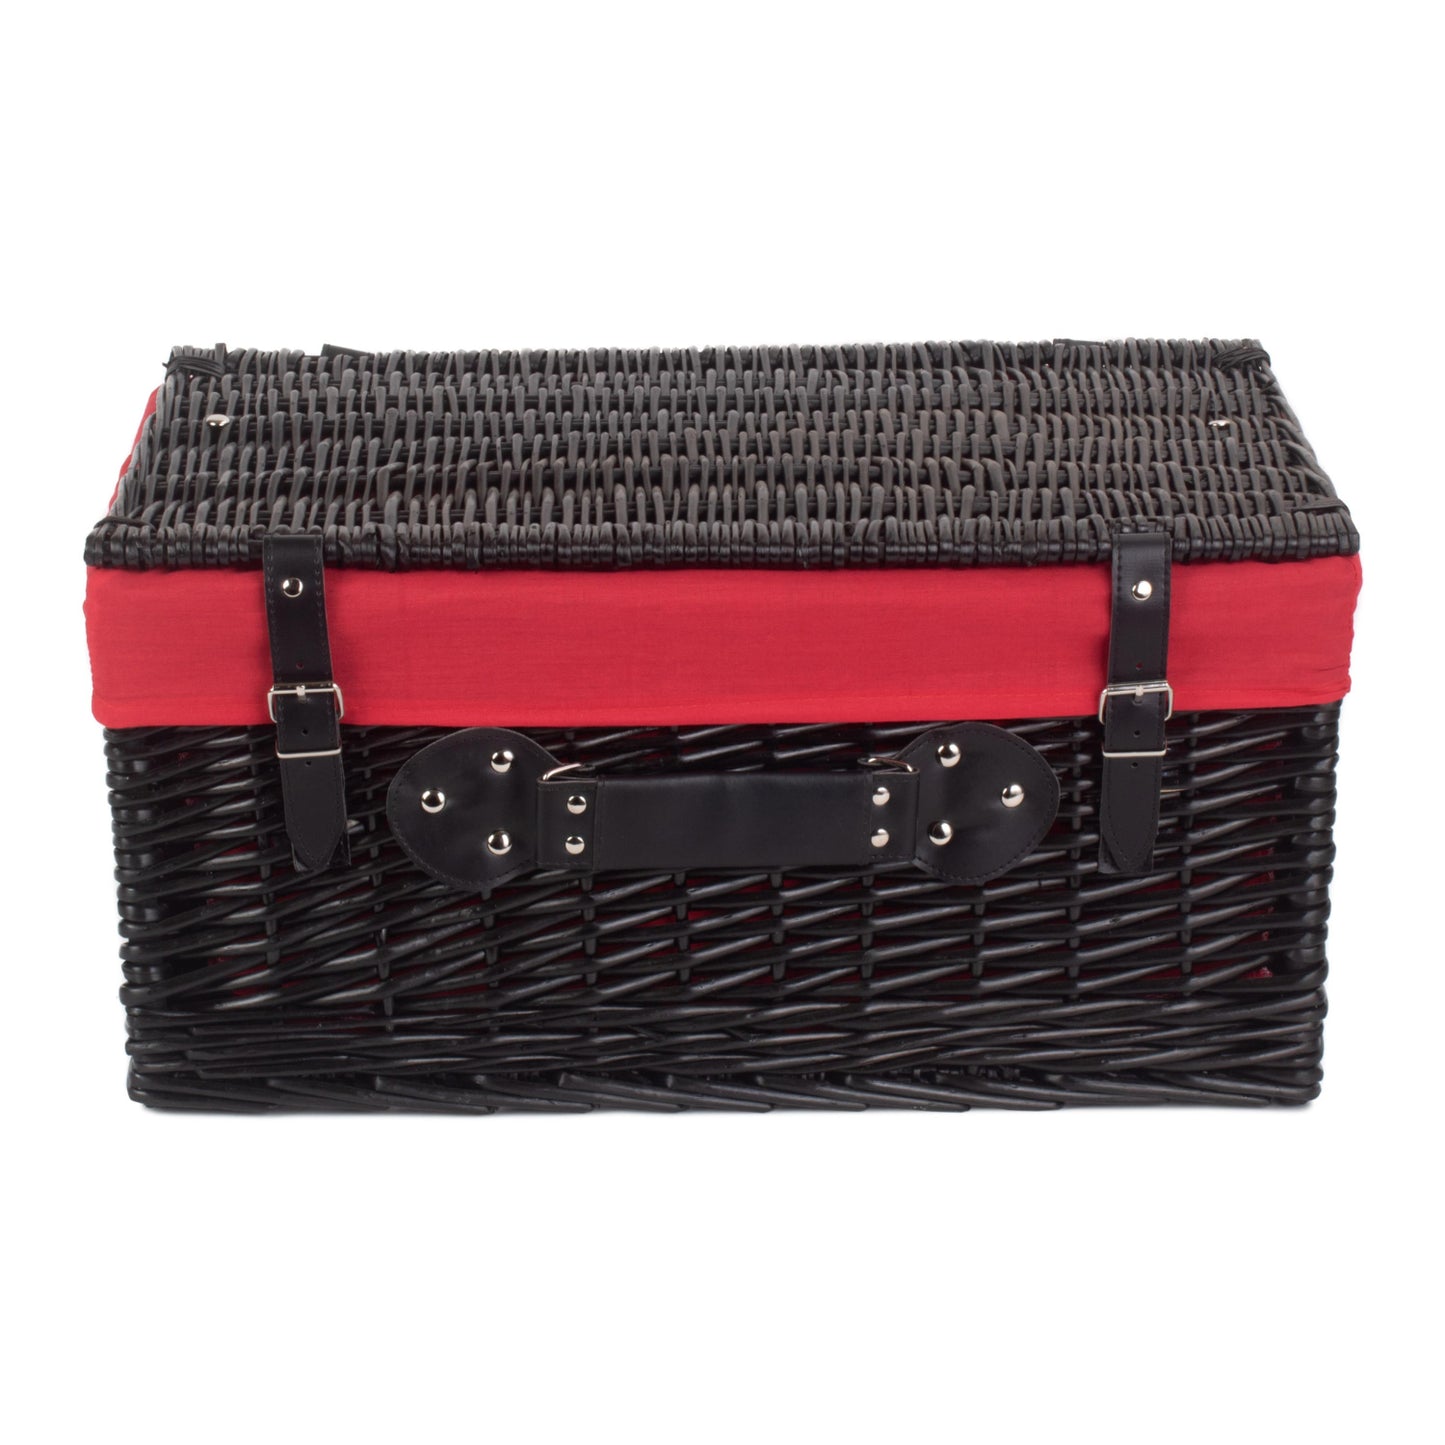 20 Inch Black Hamper With Red Lining